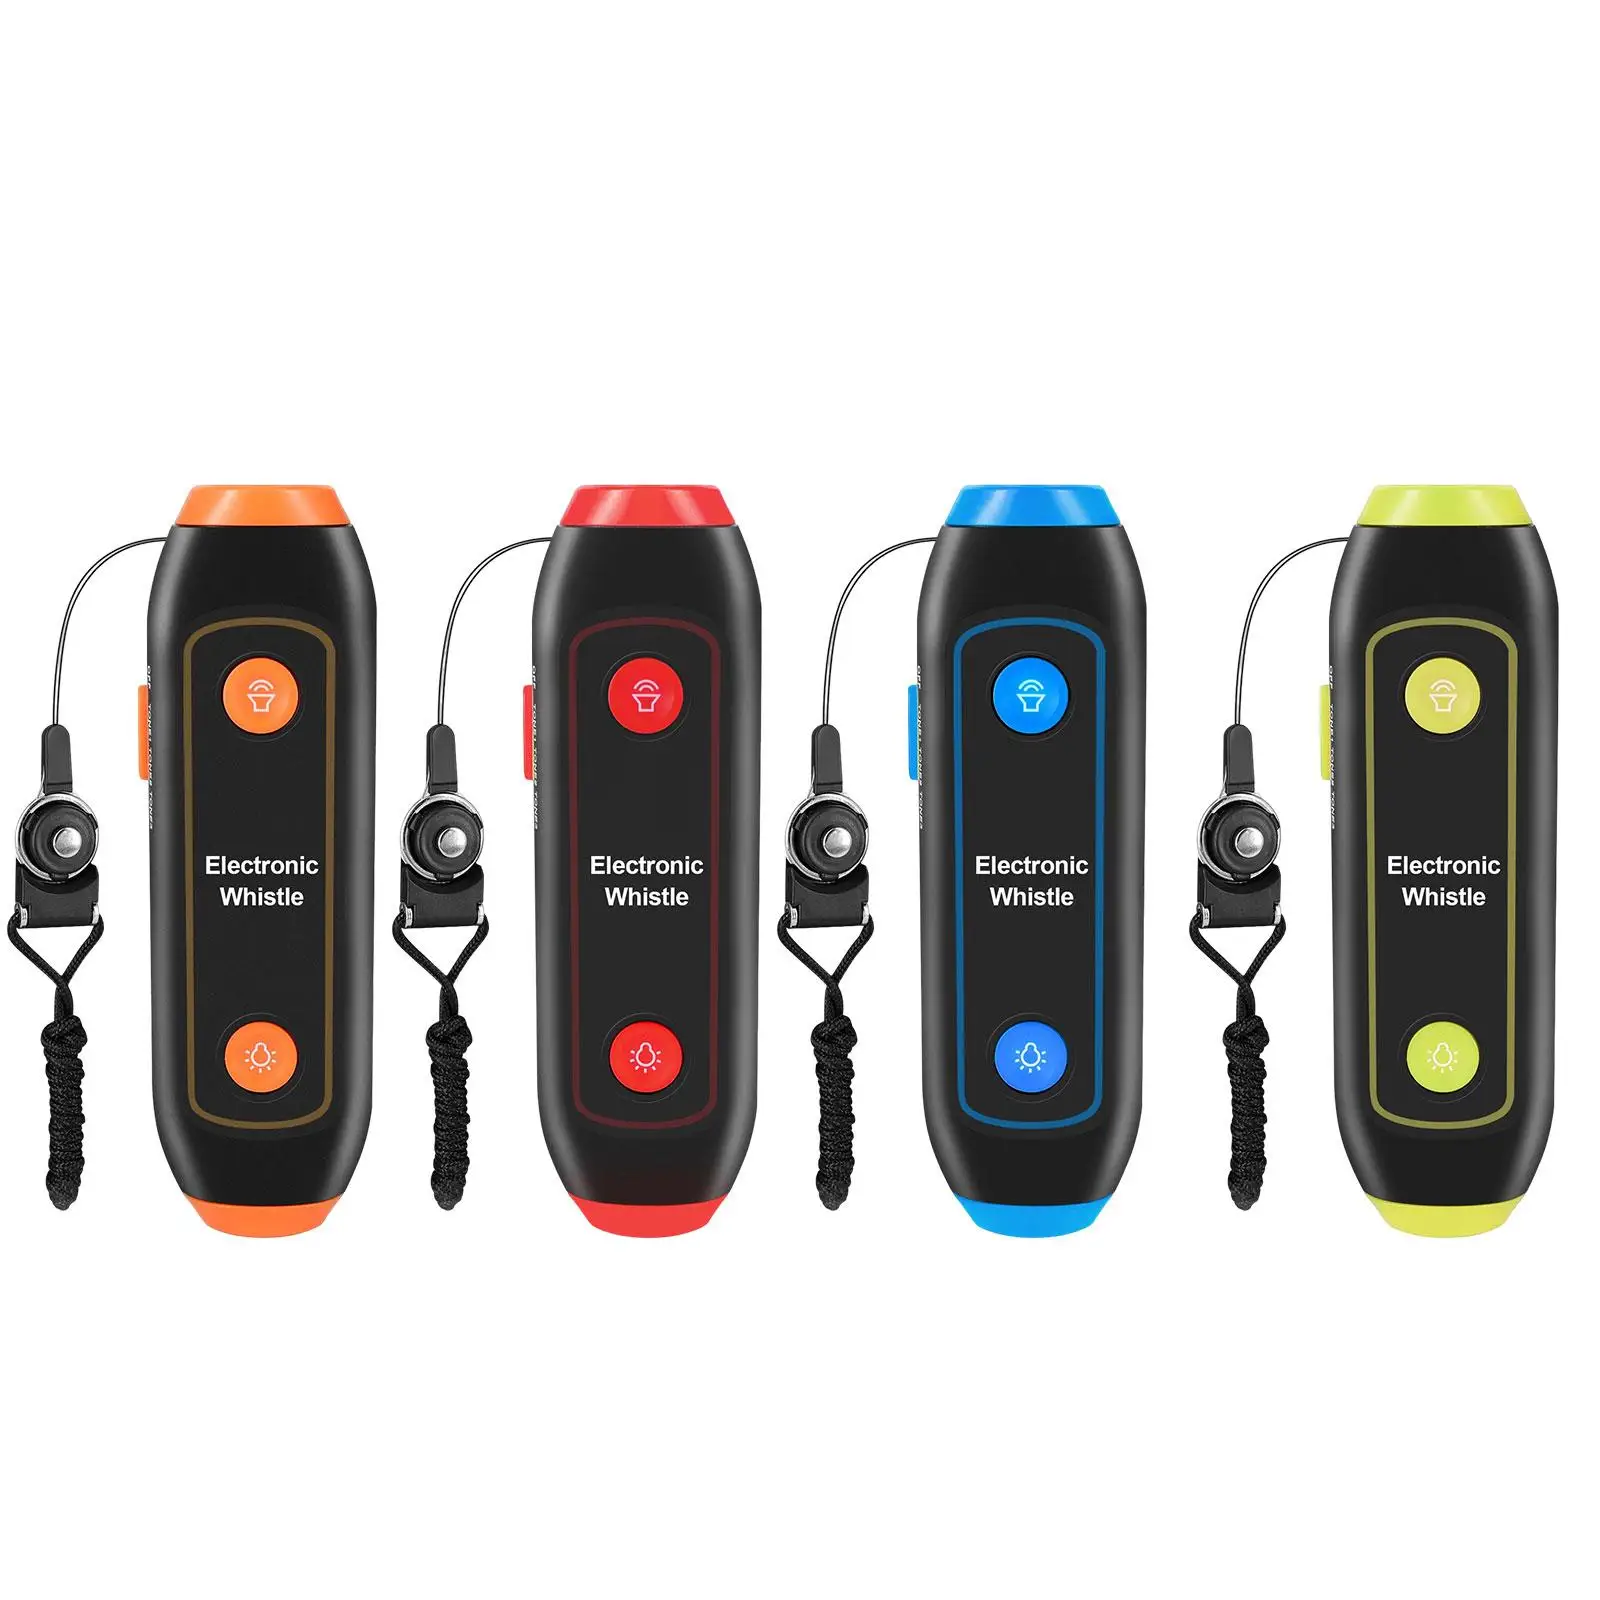 Portable Handheld Electric Whistle 3 Modes with Lanyard Electronic Whistle for Survival Coaches Referee Football